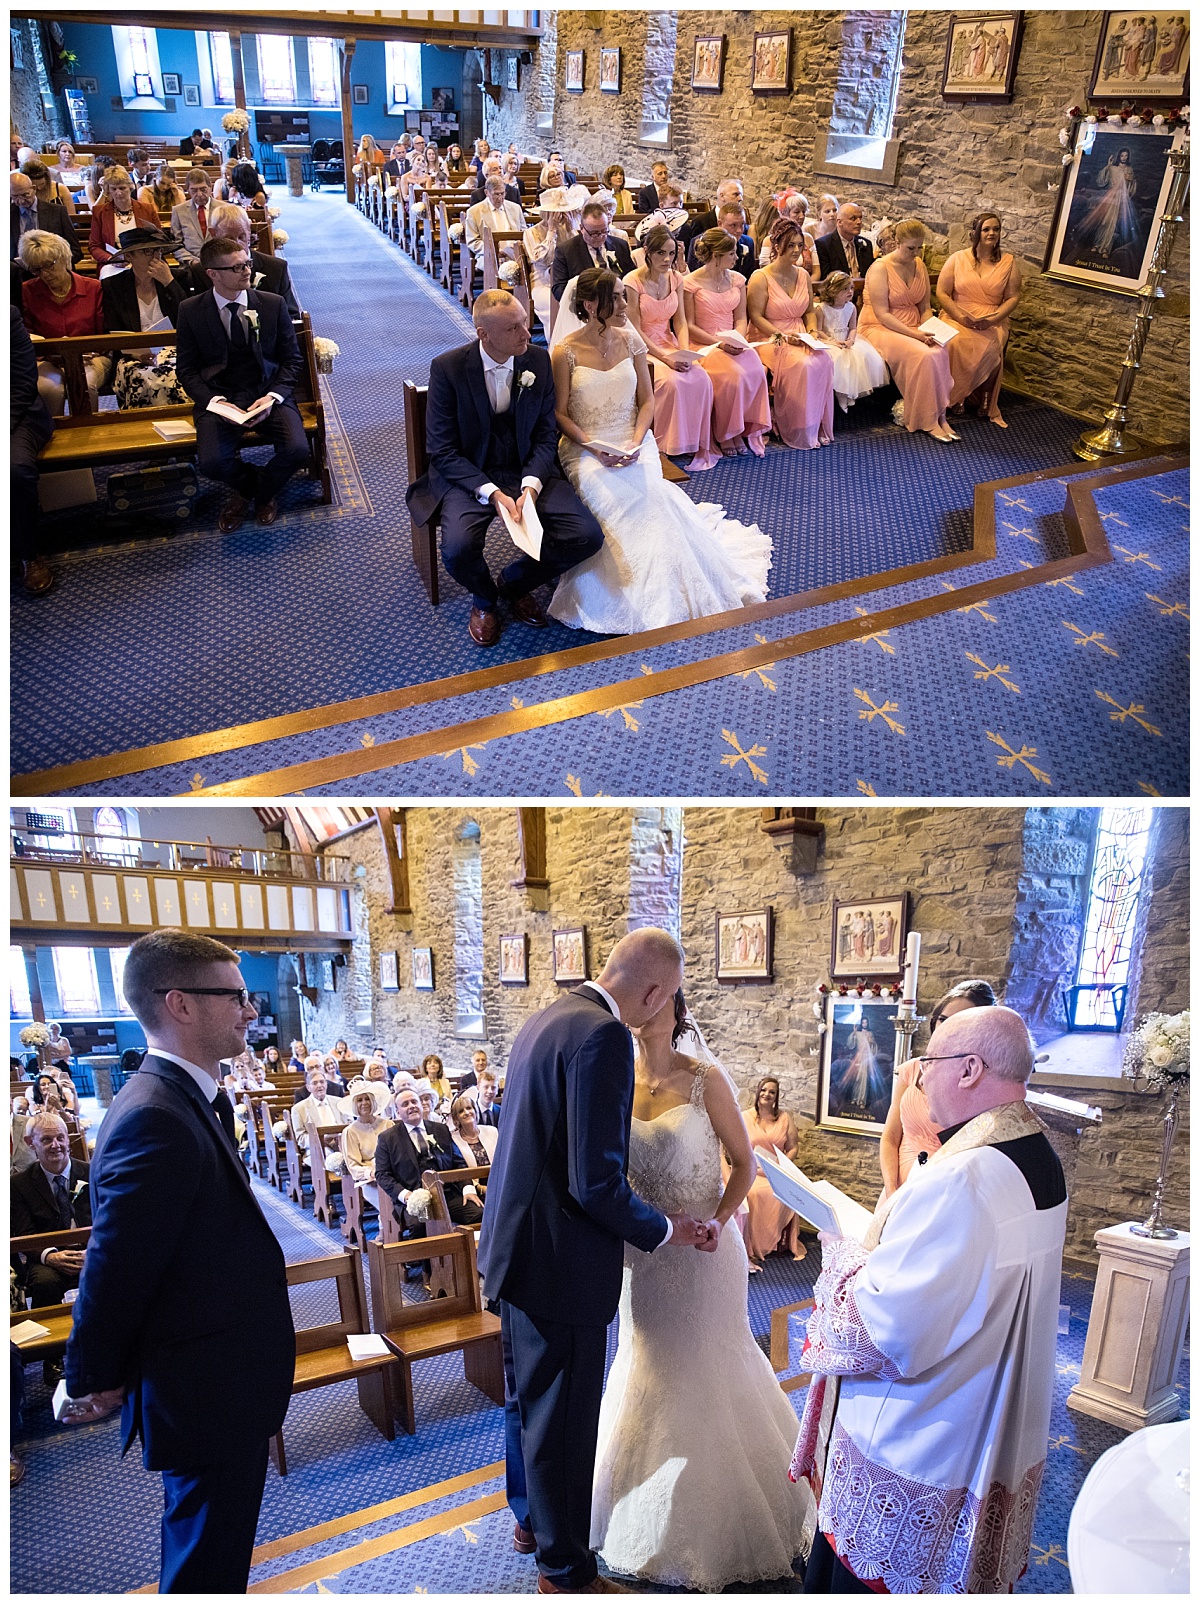 Wedding Photography Manchester - Victoria and Phillips Shireburn Arms wedding 30